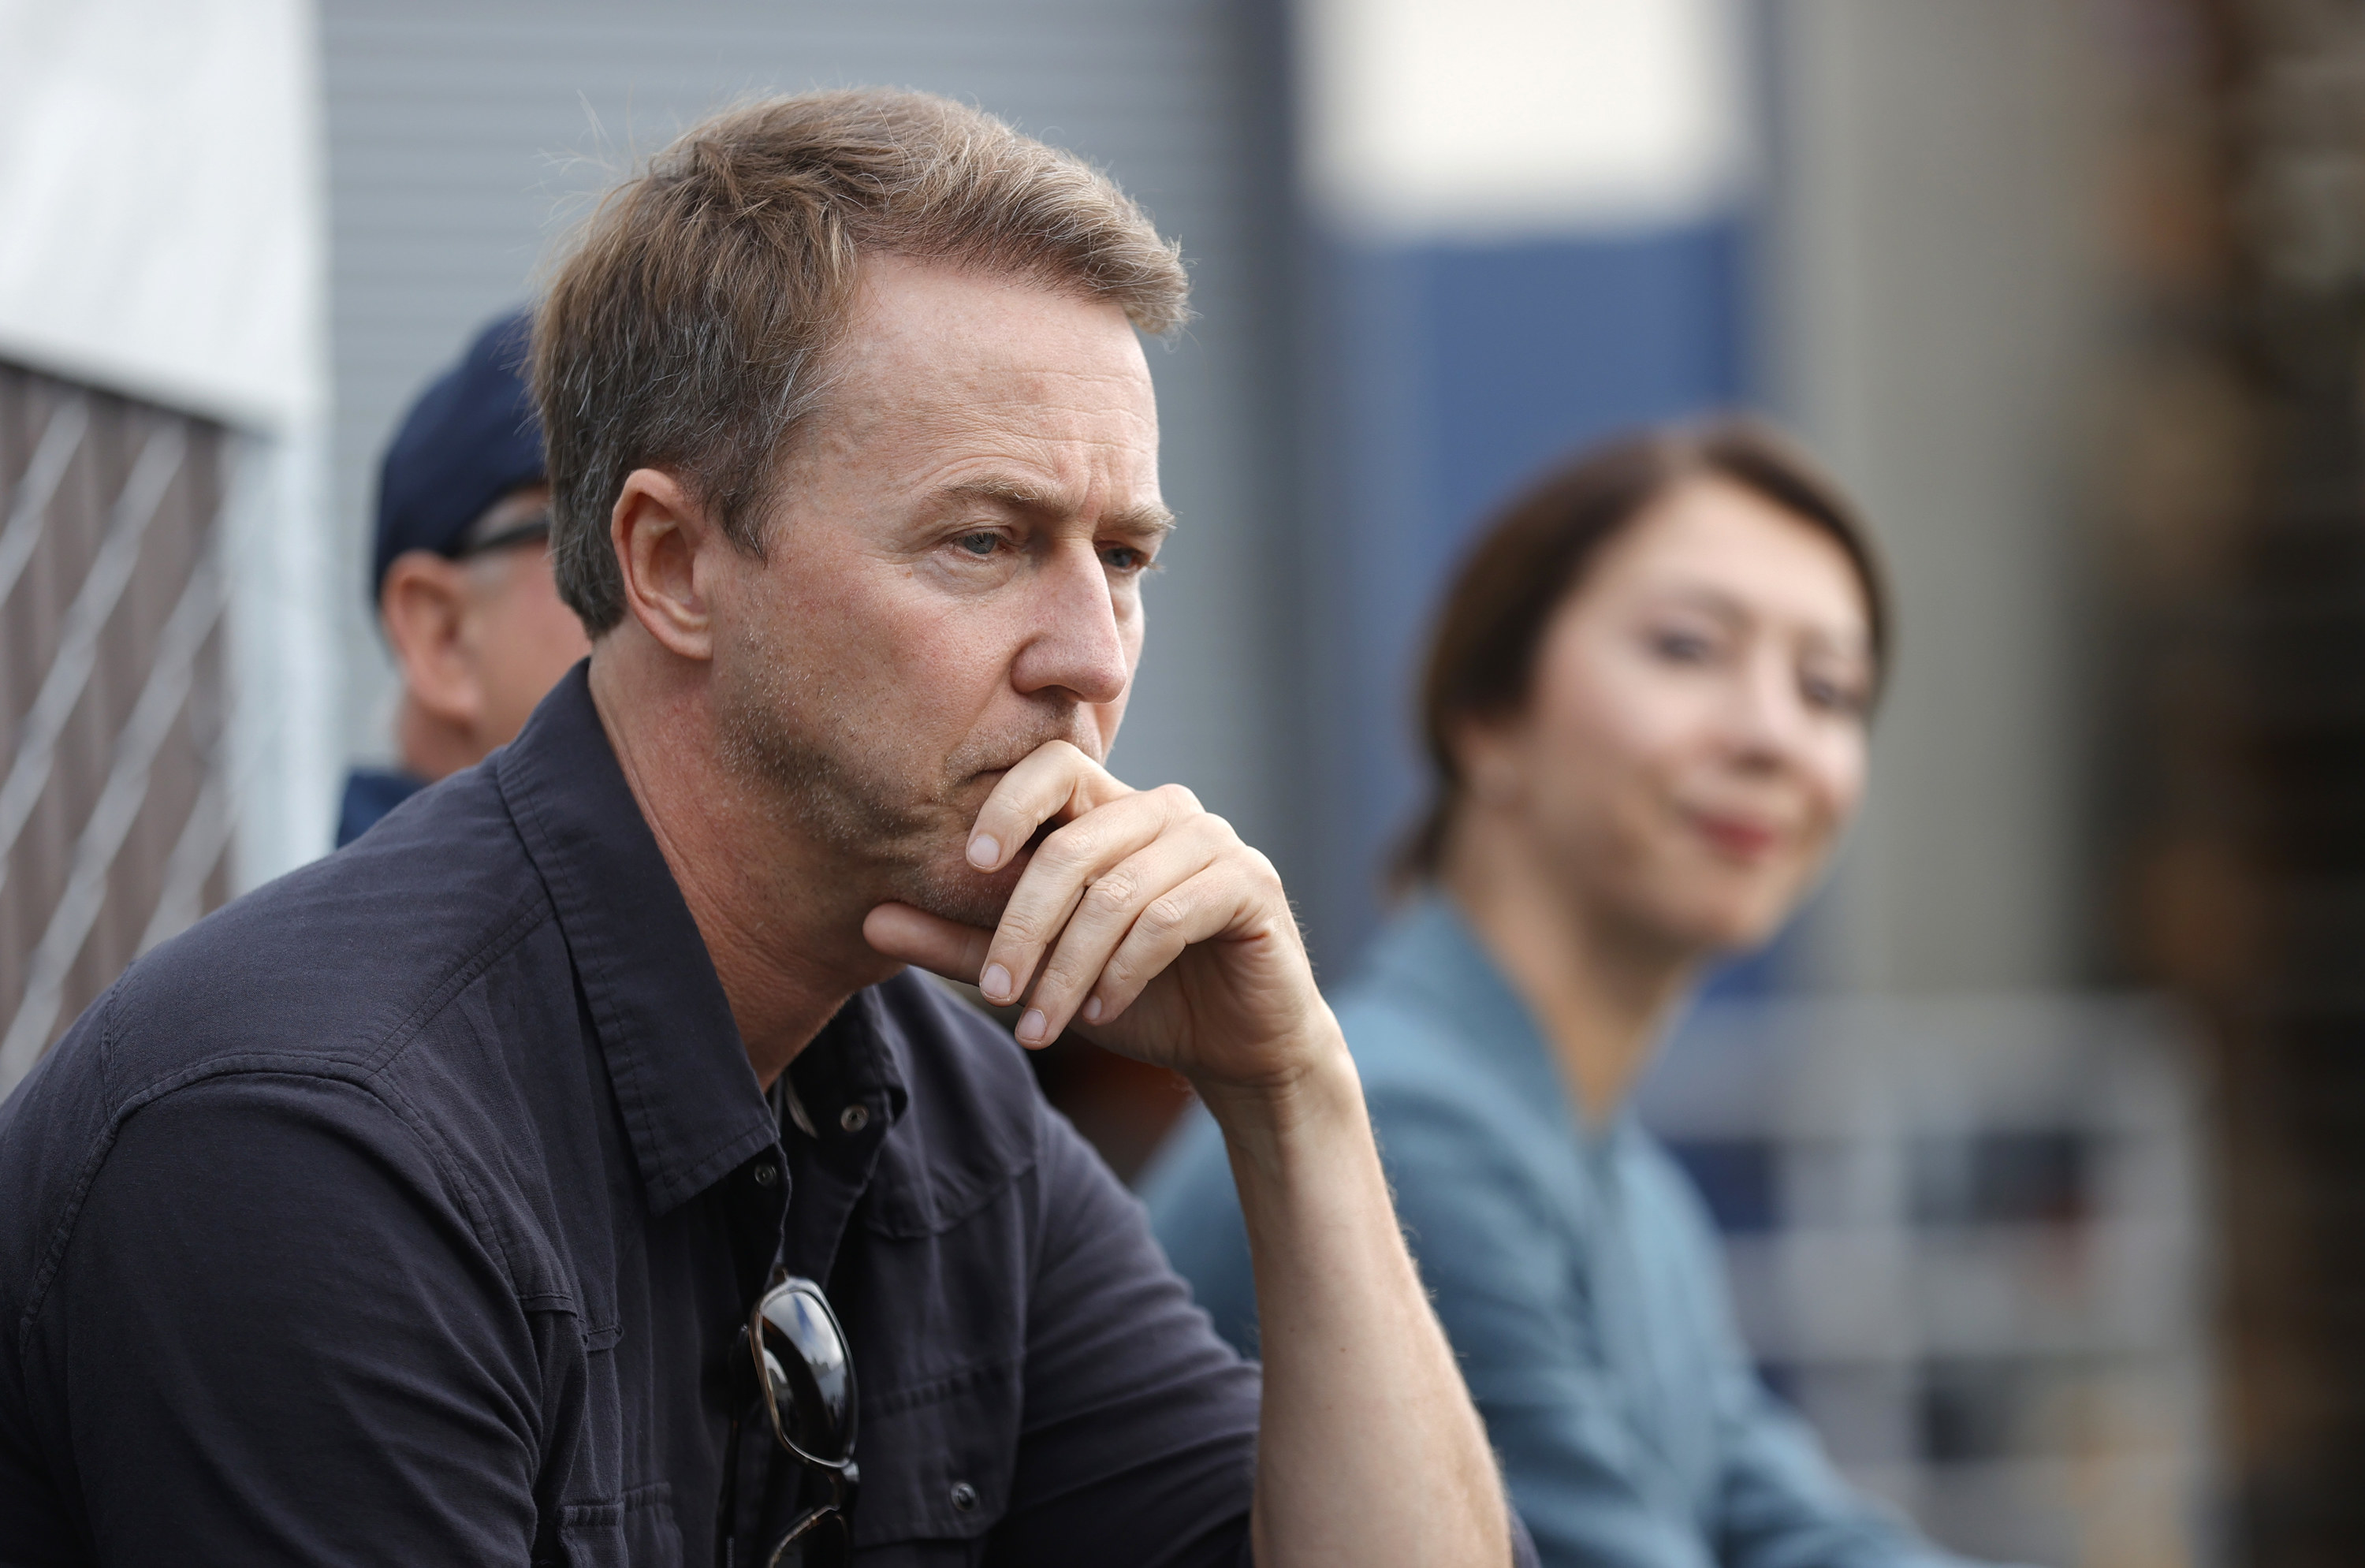 Edward Norton appearing to look pensive while sitting down